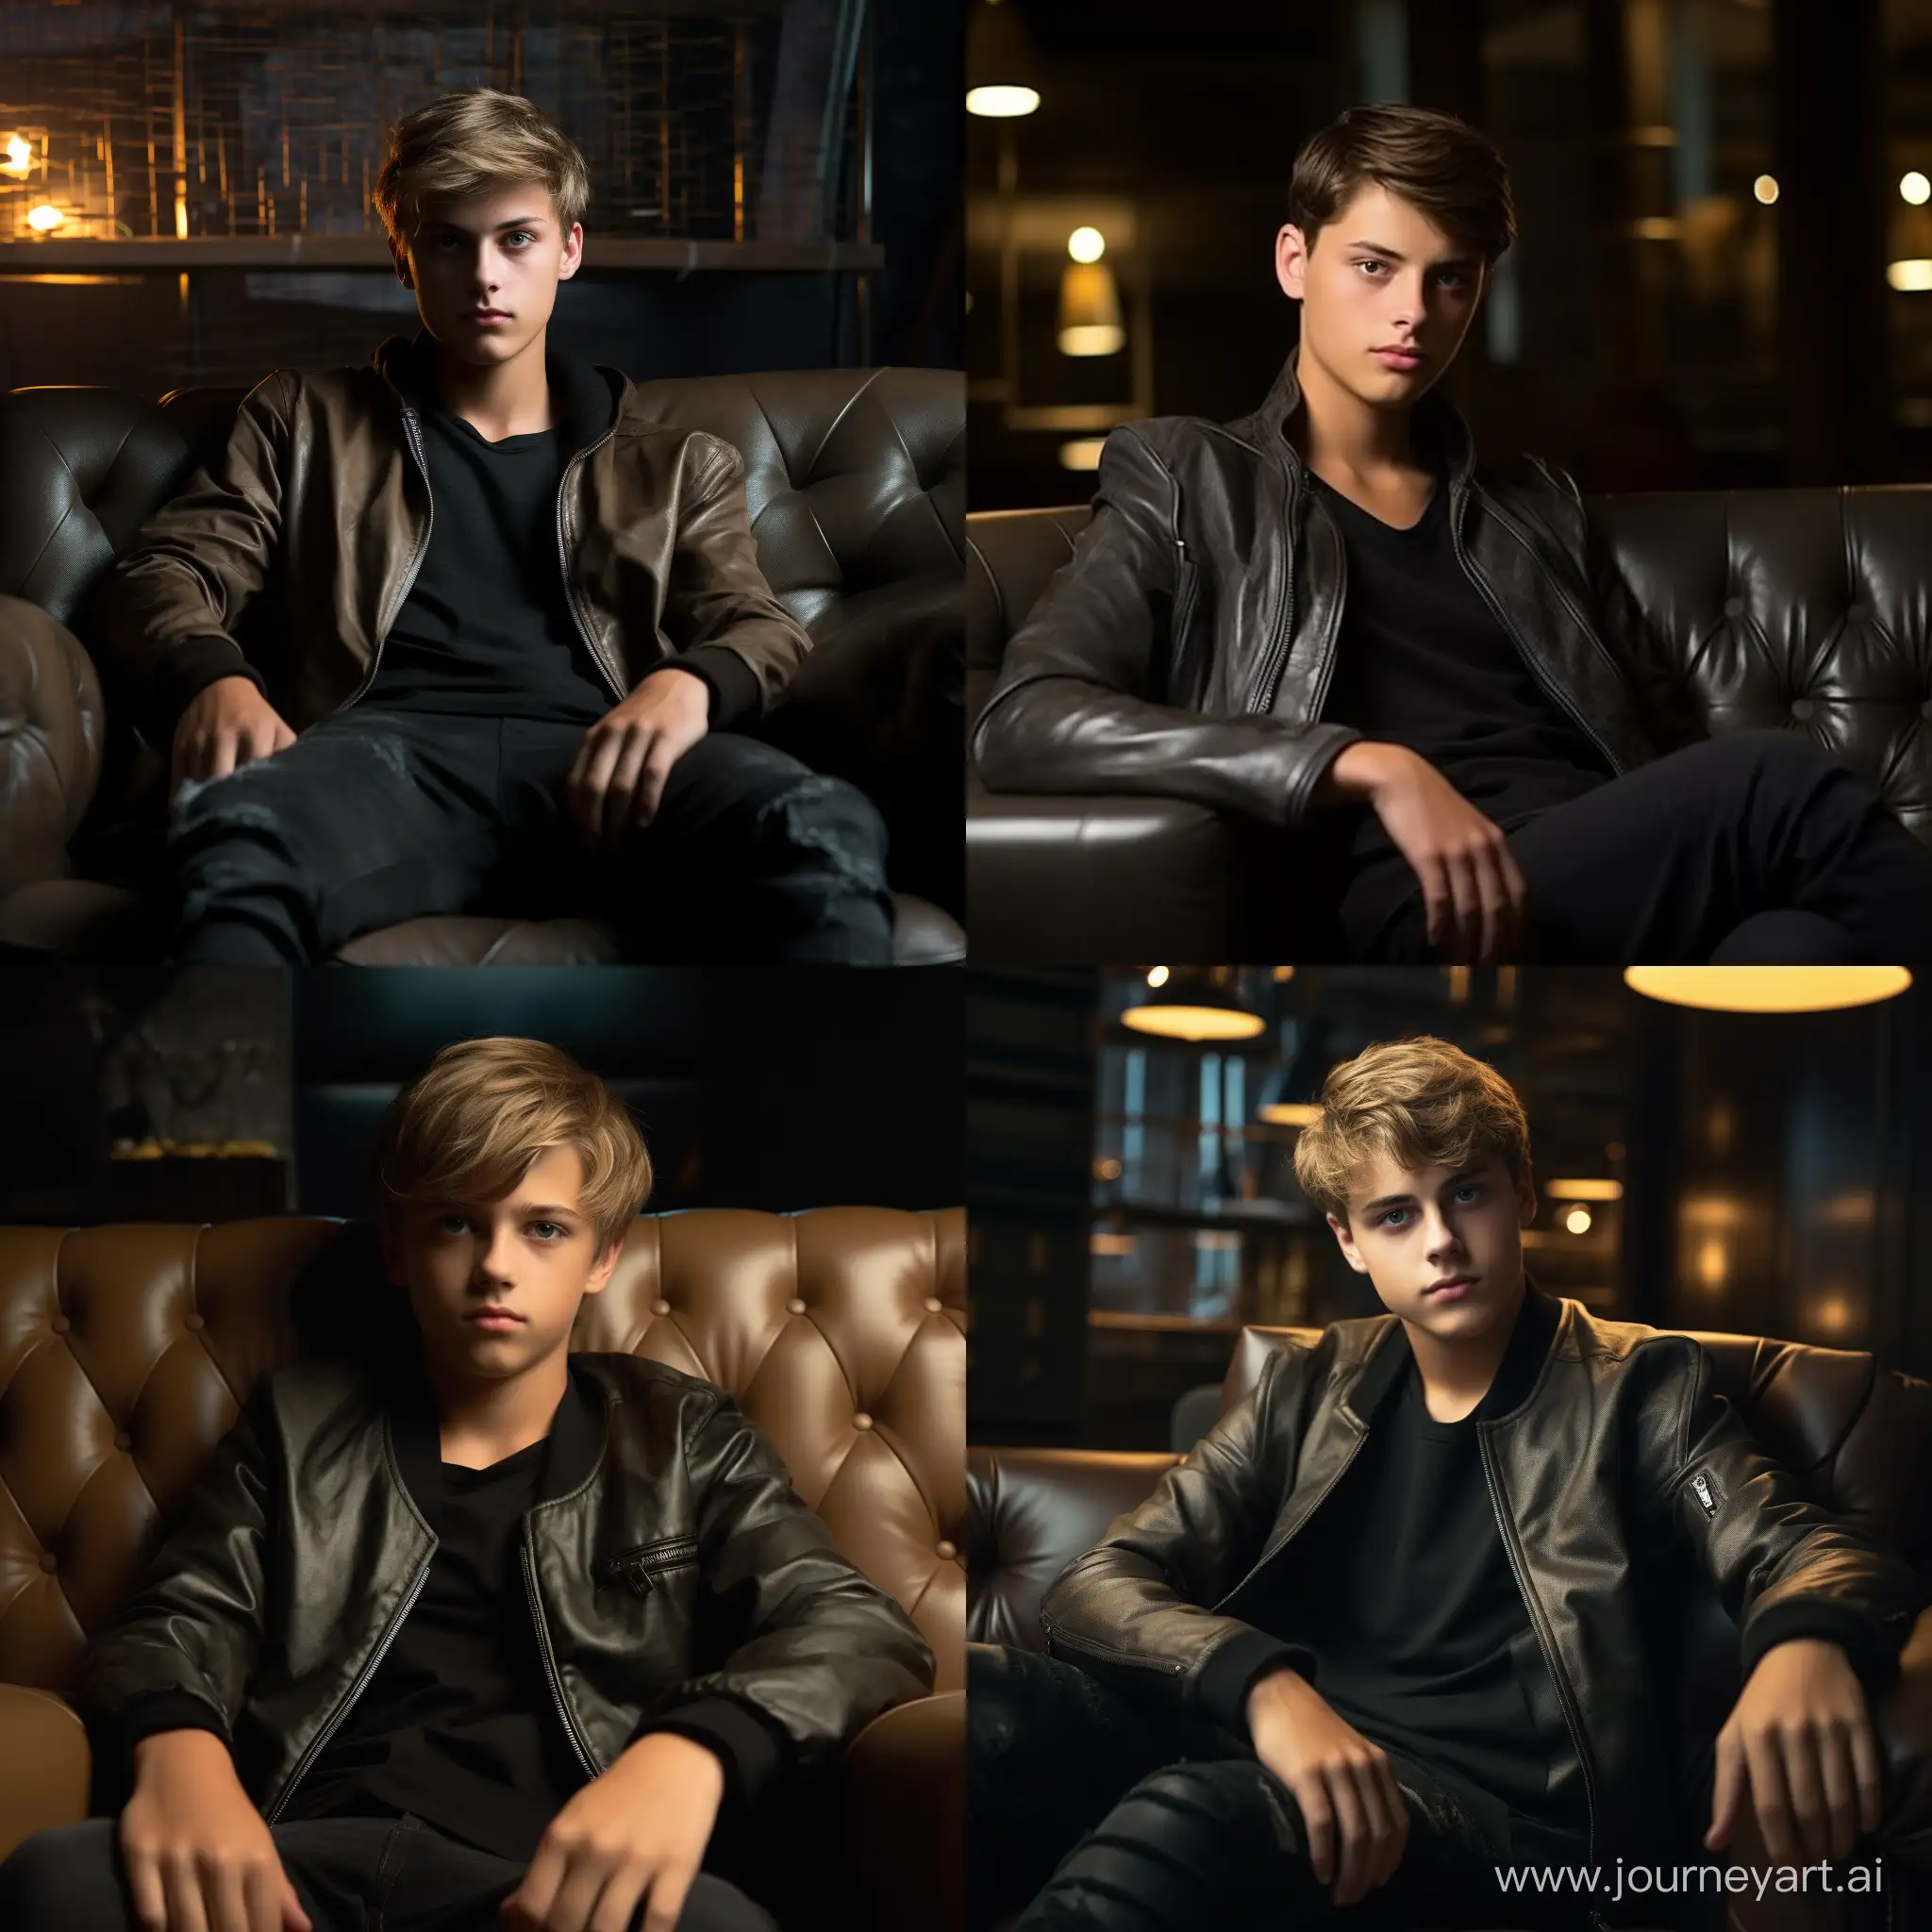 A sophisticated, realistic 4k cinematic photo,young adult, Not a mature 17 years old. European appearance with classical medium length haircut. He's wearing brand-new causal brand clothes. He is sitting on leather sofa, his focused demeanor enhanced by the soft glow of the screen in the room's understated lighting. The setting boasts a luxurious modern design with expensive furniture and book-lined shelves in the background that suggest depth and texture. In the style of 35mm film 